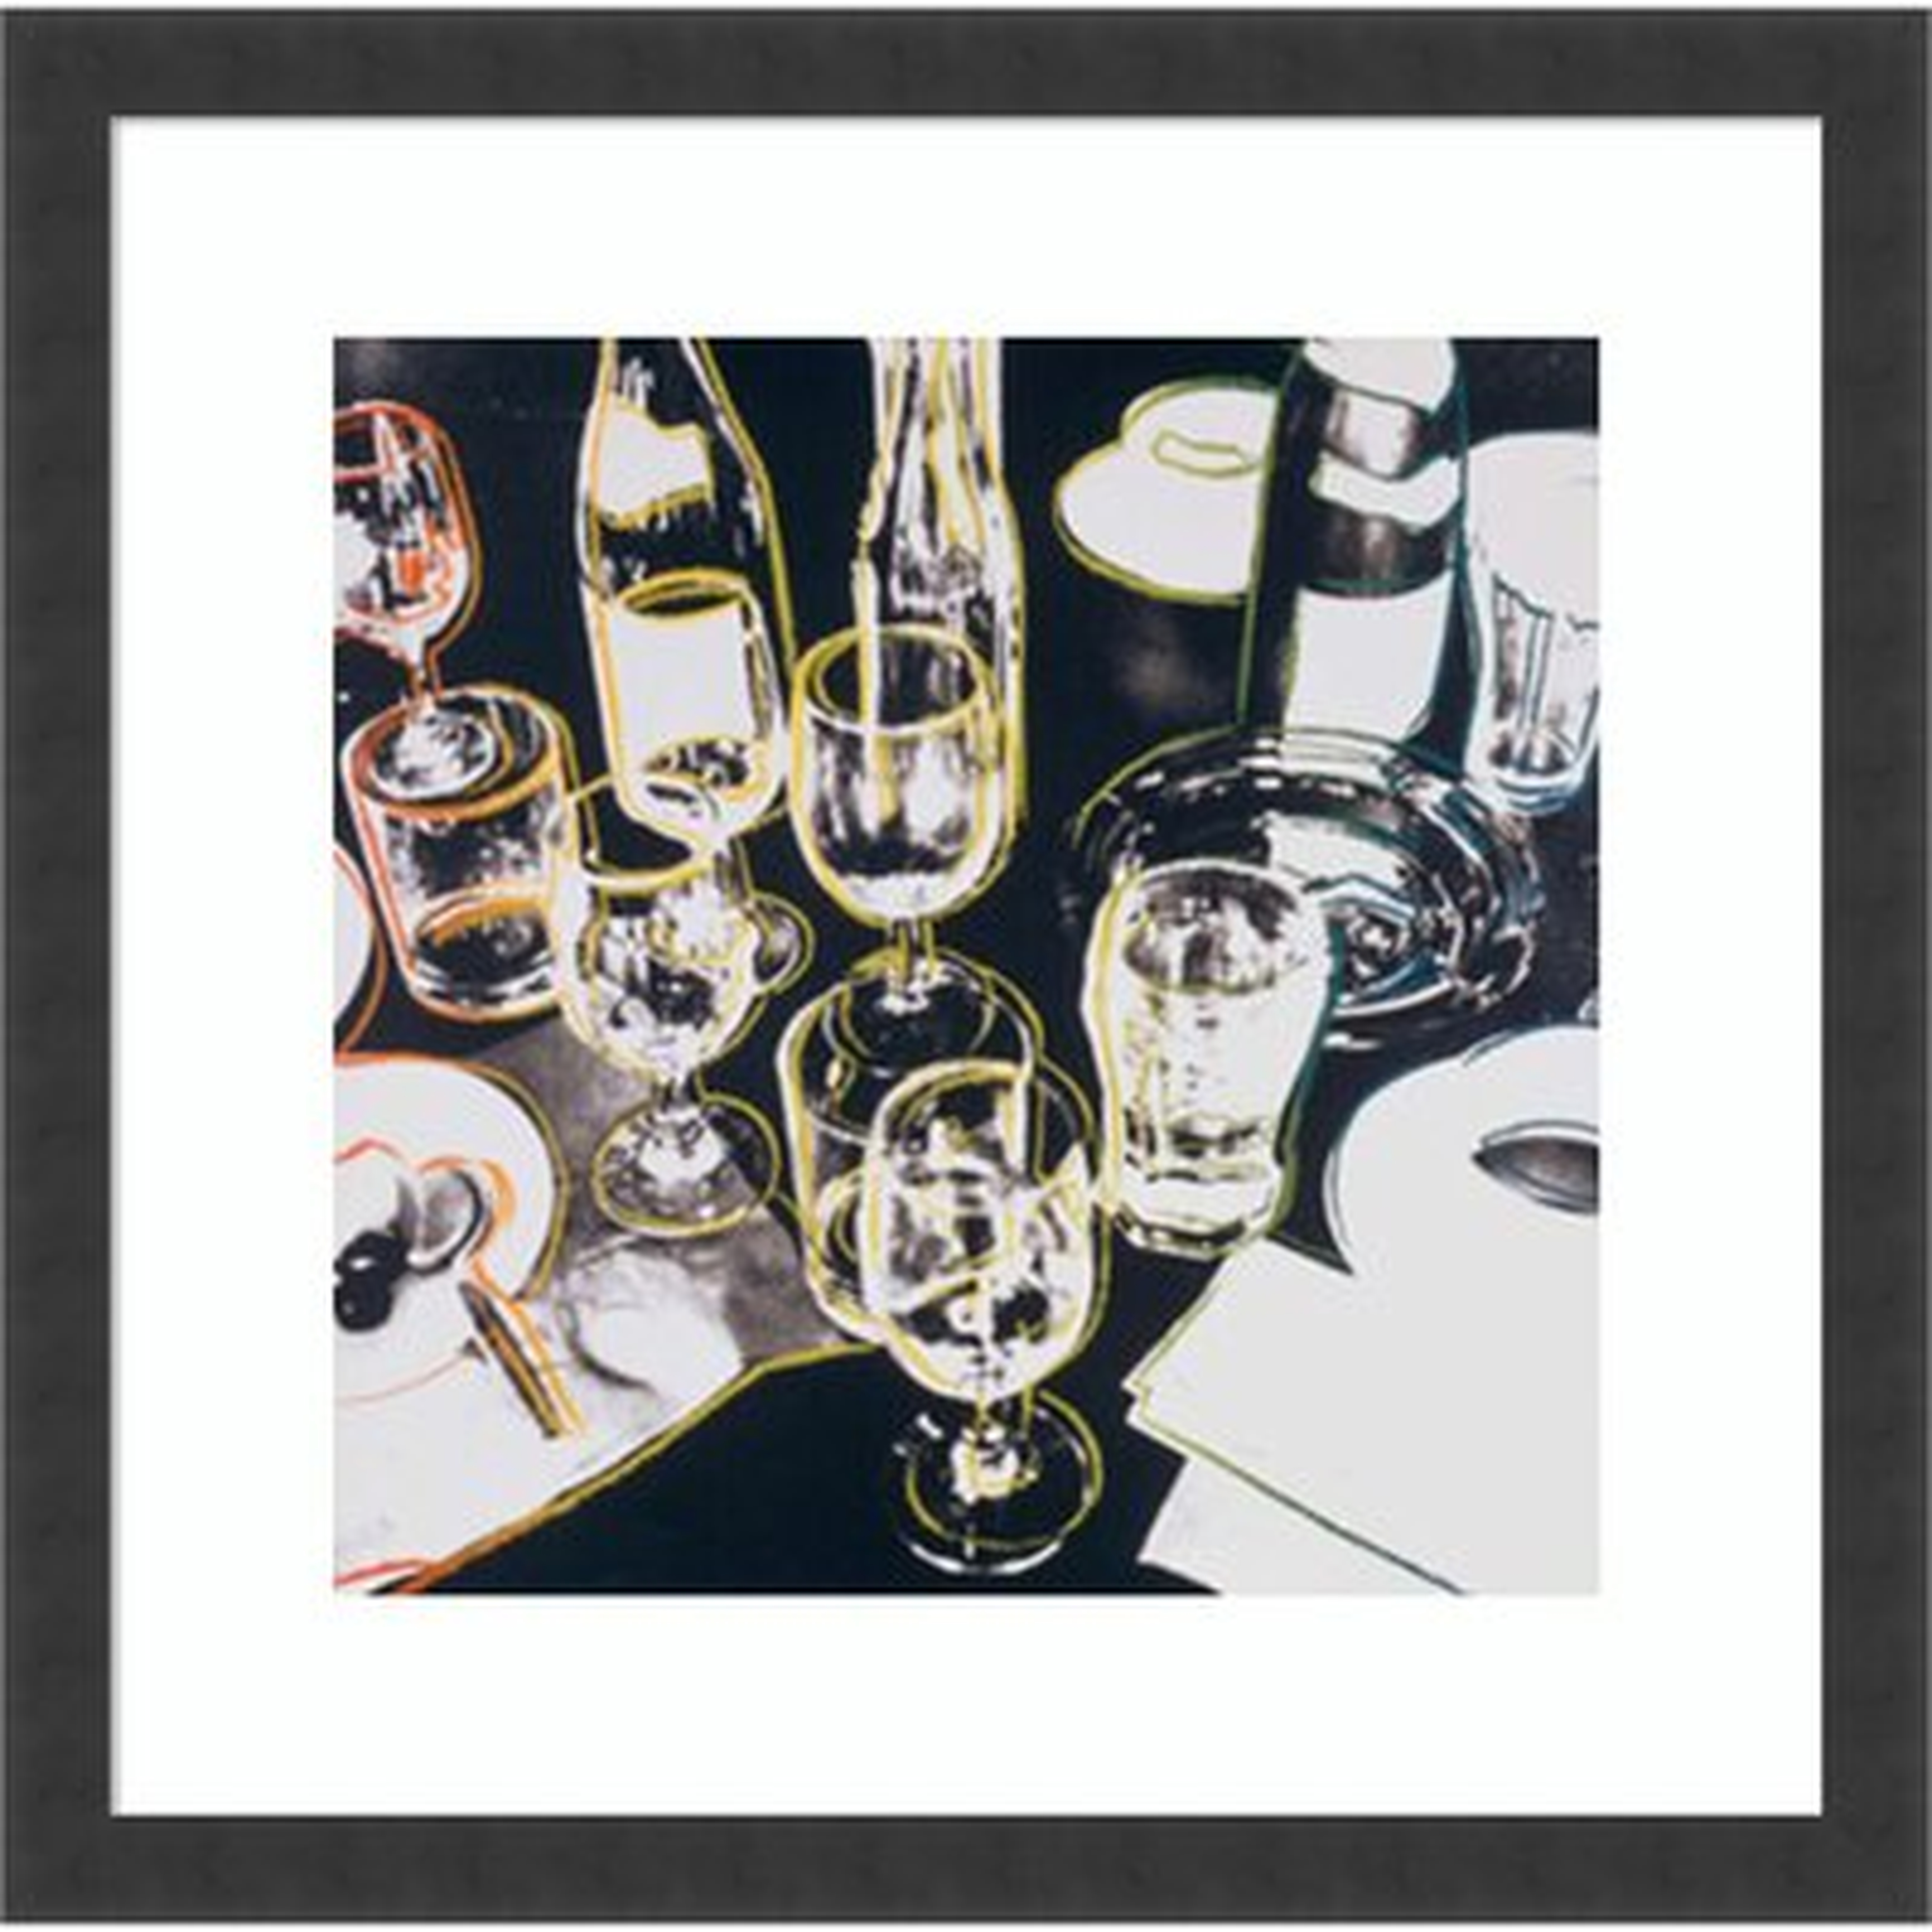 Framed Art Print 'After the Party, 1979' by Andy Warhol: Outer Size 24 x 19" by Andy Warhol - Picture Frame Graphic Art Print on Paper - AllModern